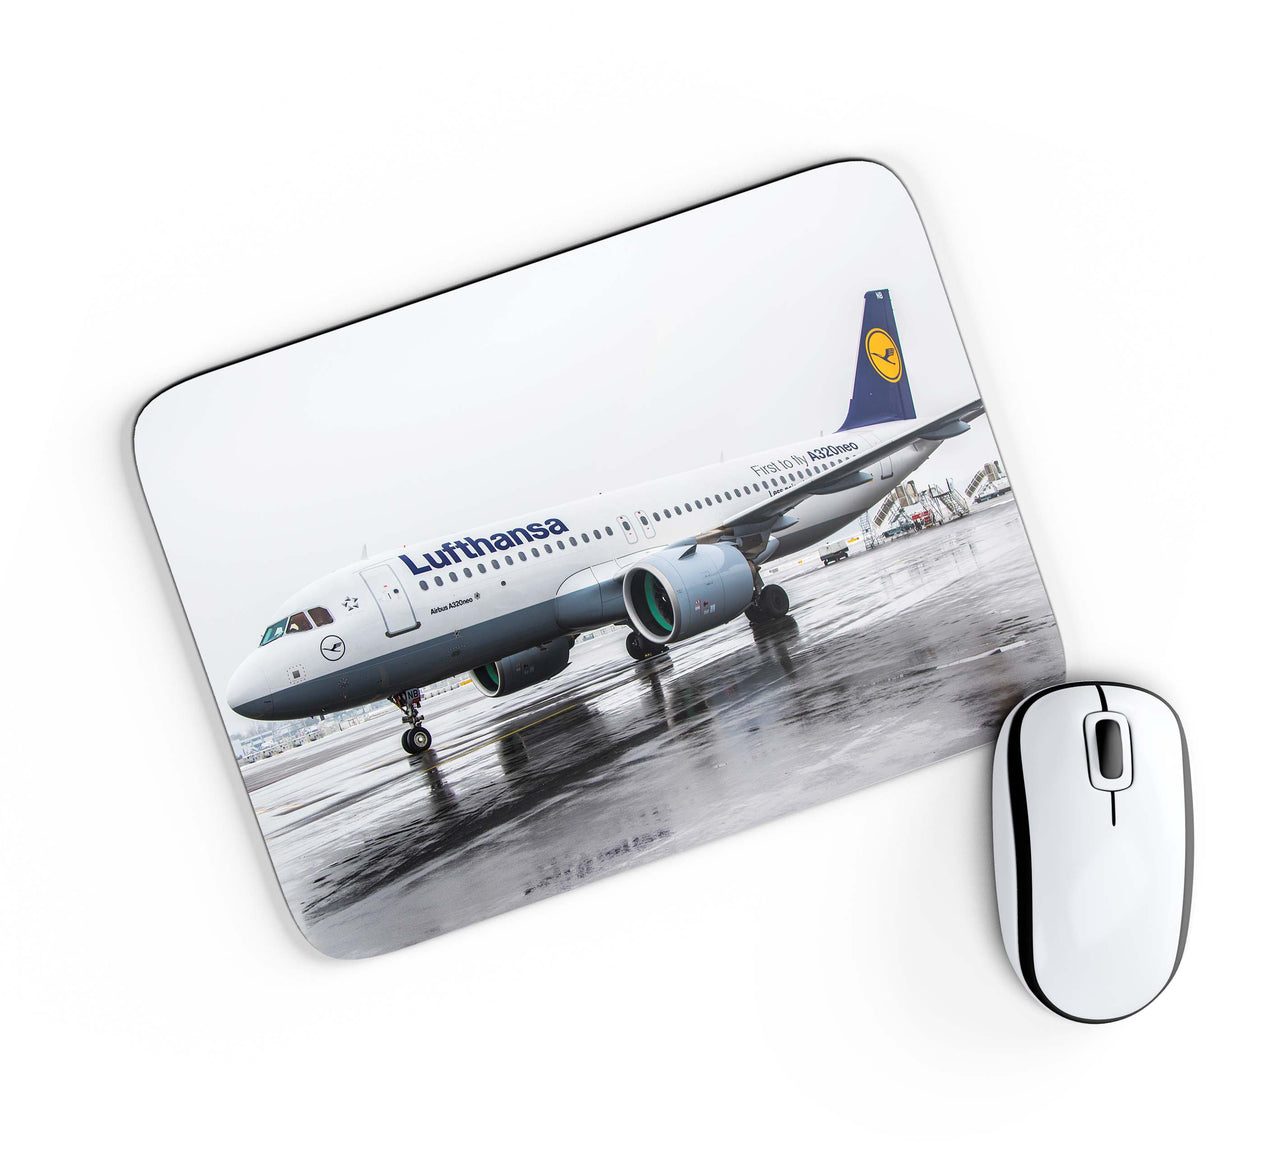 Lufthansa's A320 Neo Designed Mouse Pads